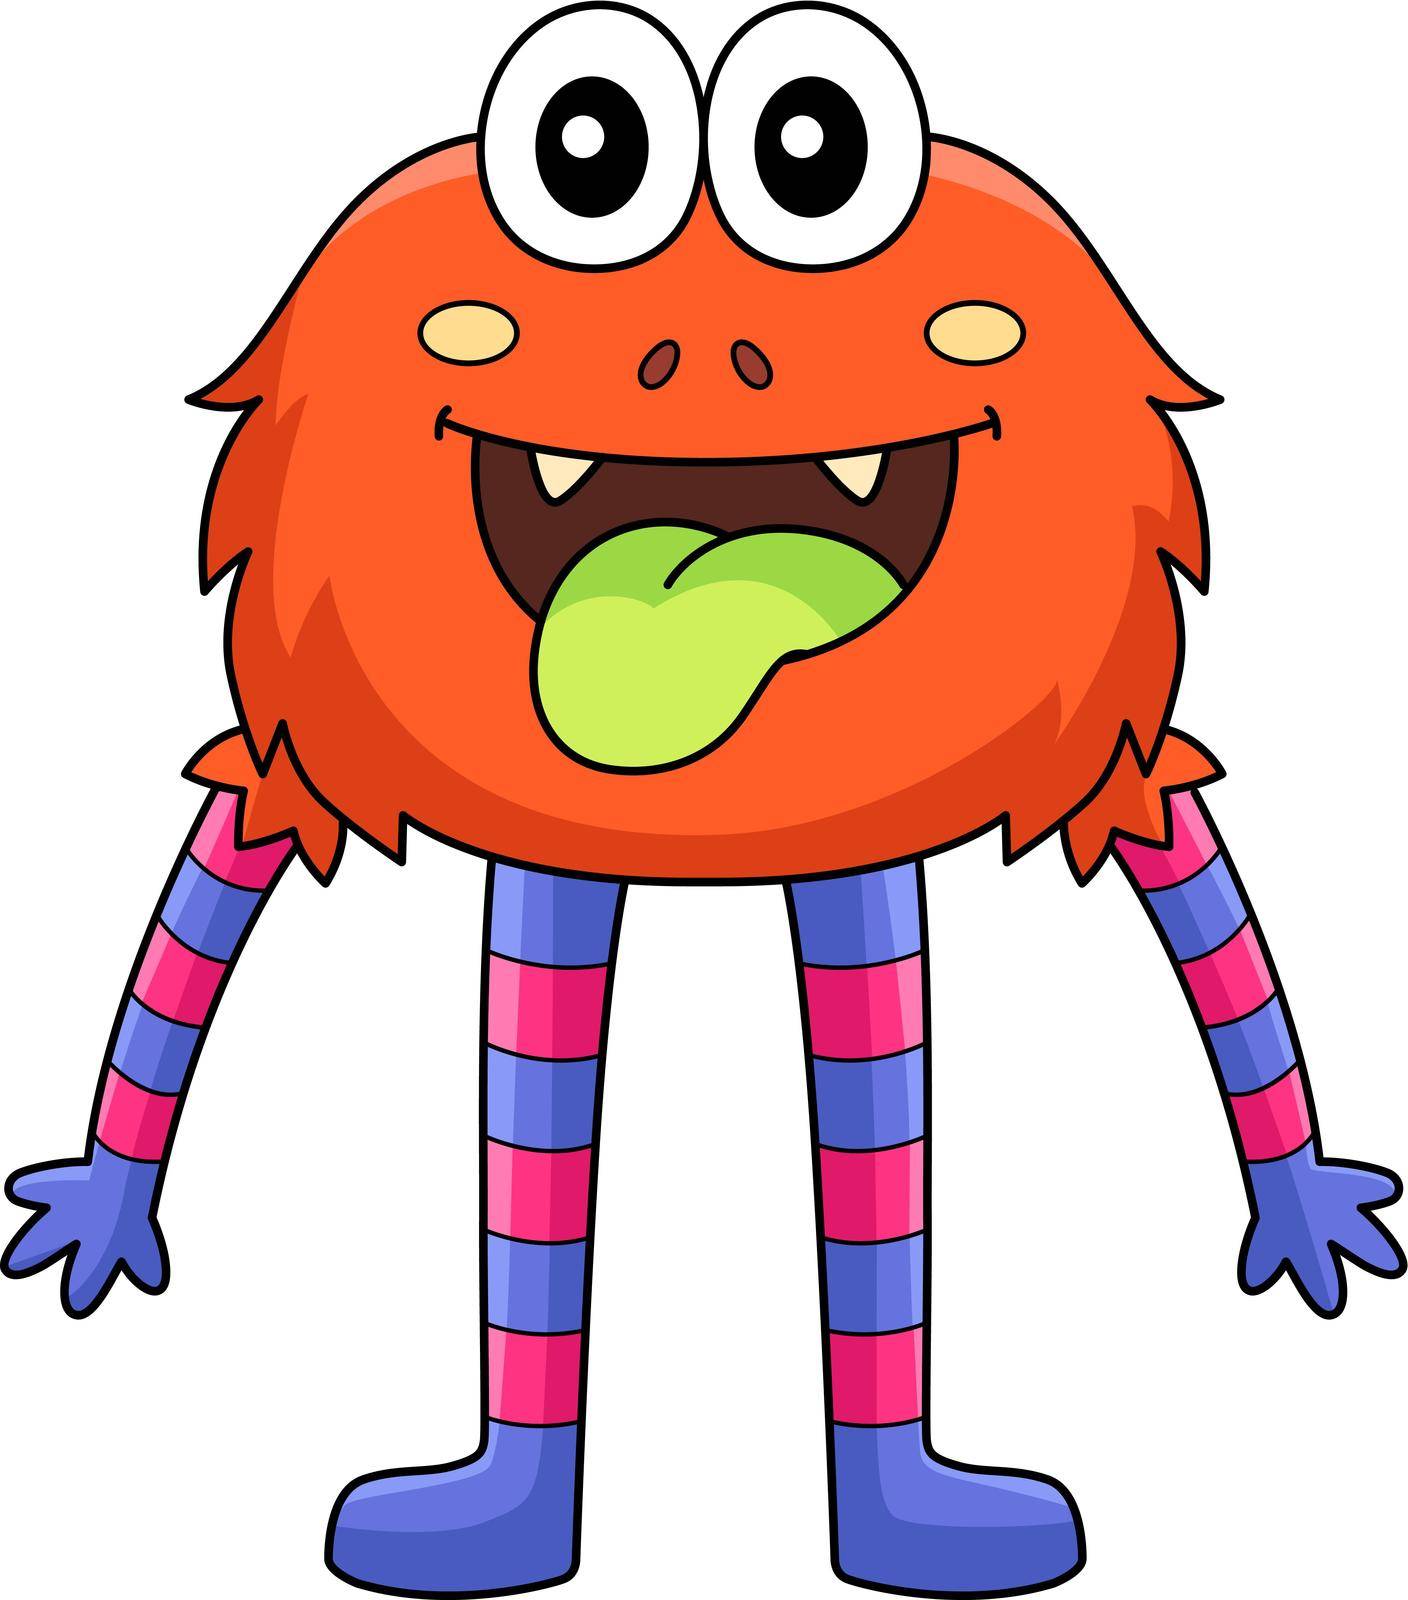 This cartoon clipart shows a Monster with Long Arm And Long Leg illustration.